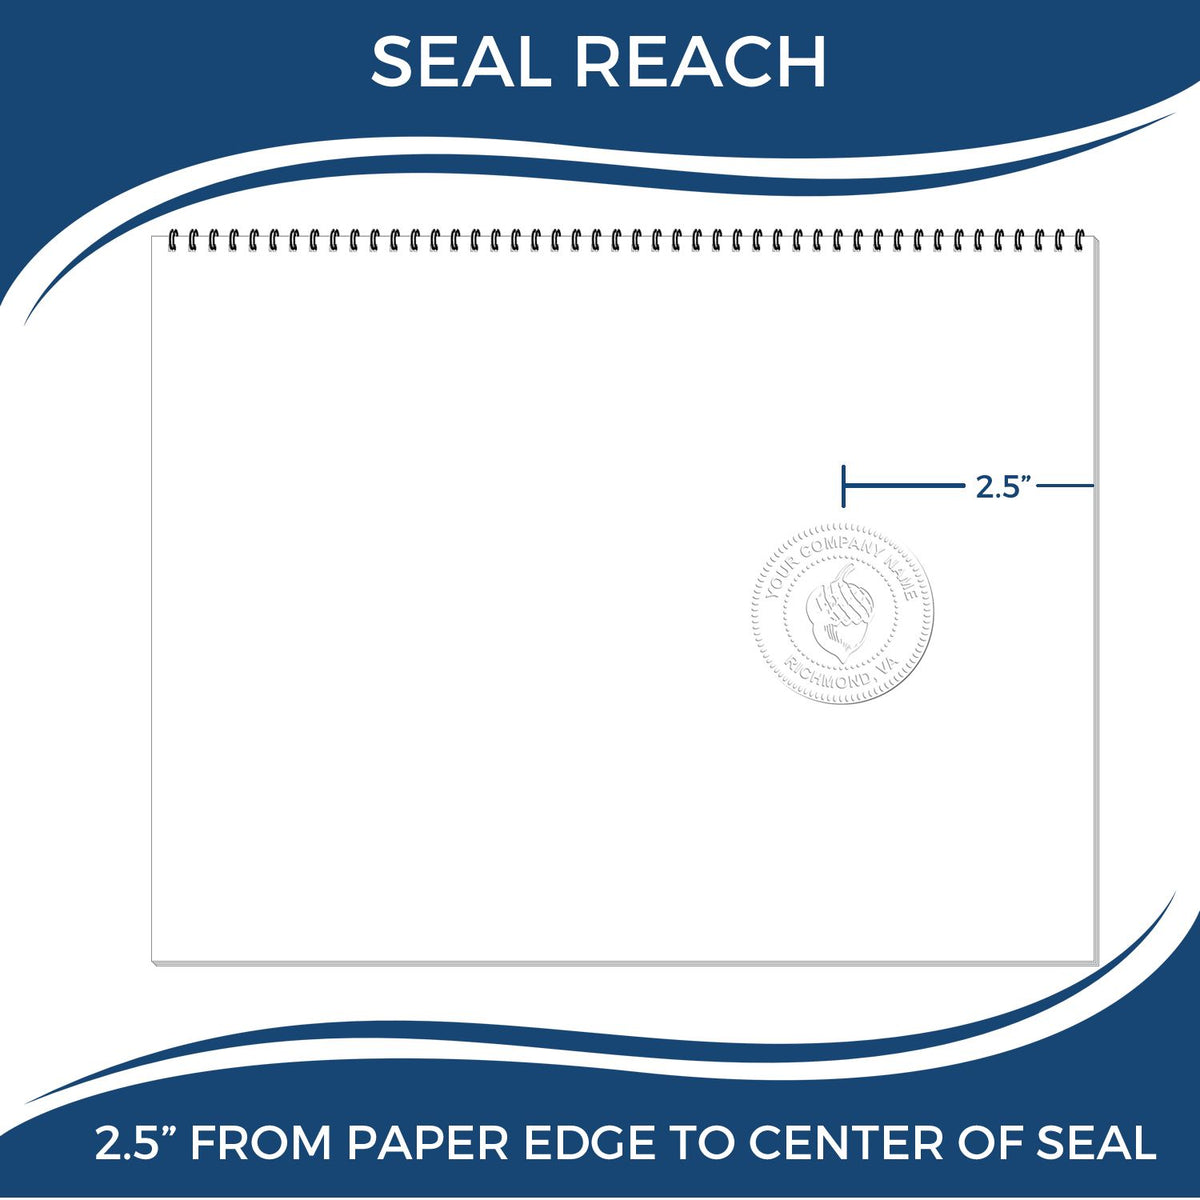 An infographic showing the seal reach which is represented by a ruler and a miniature seal image of the Heavy Duty Cast Iron Rhode Island Architect Embosser